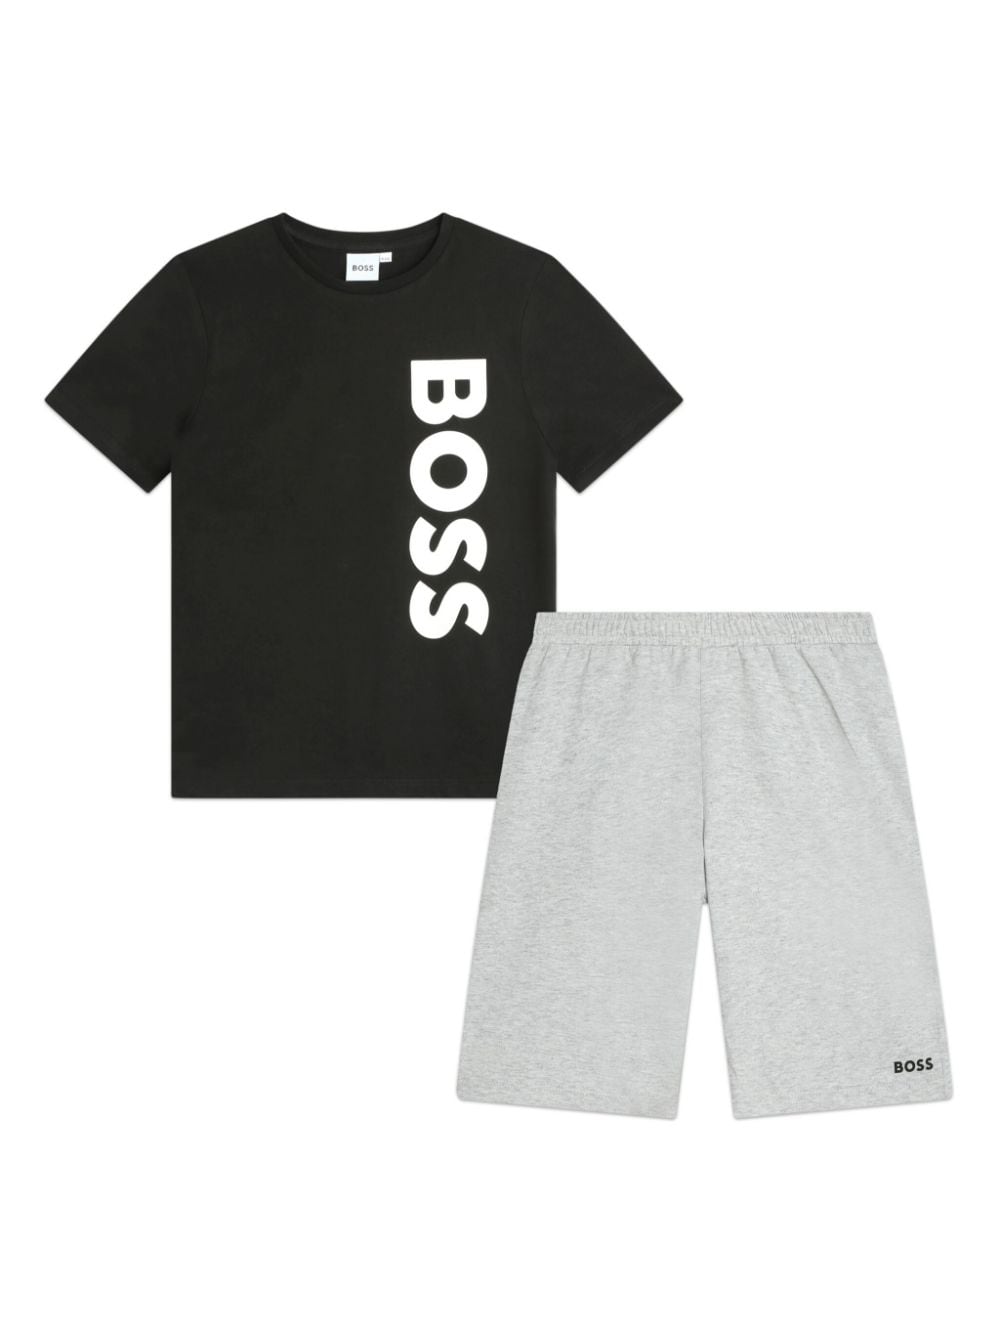 Black and gray sports suit for boys